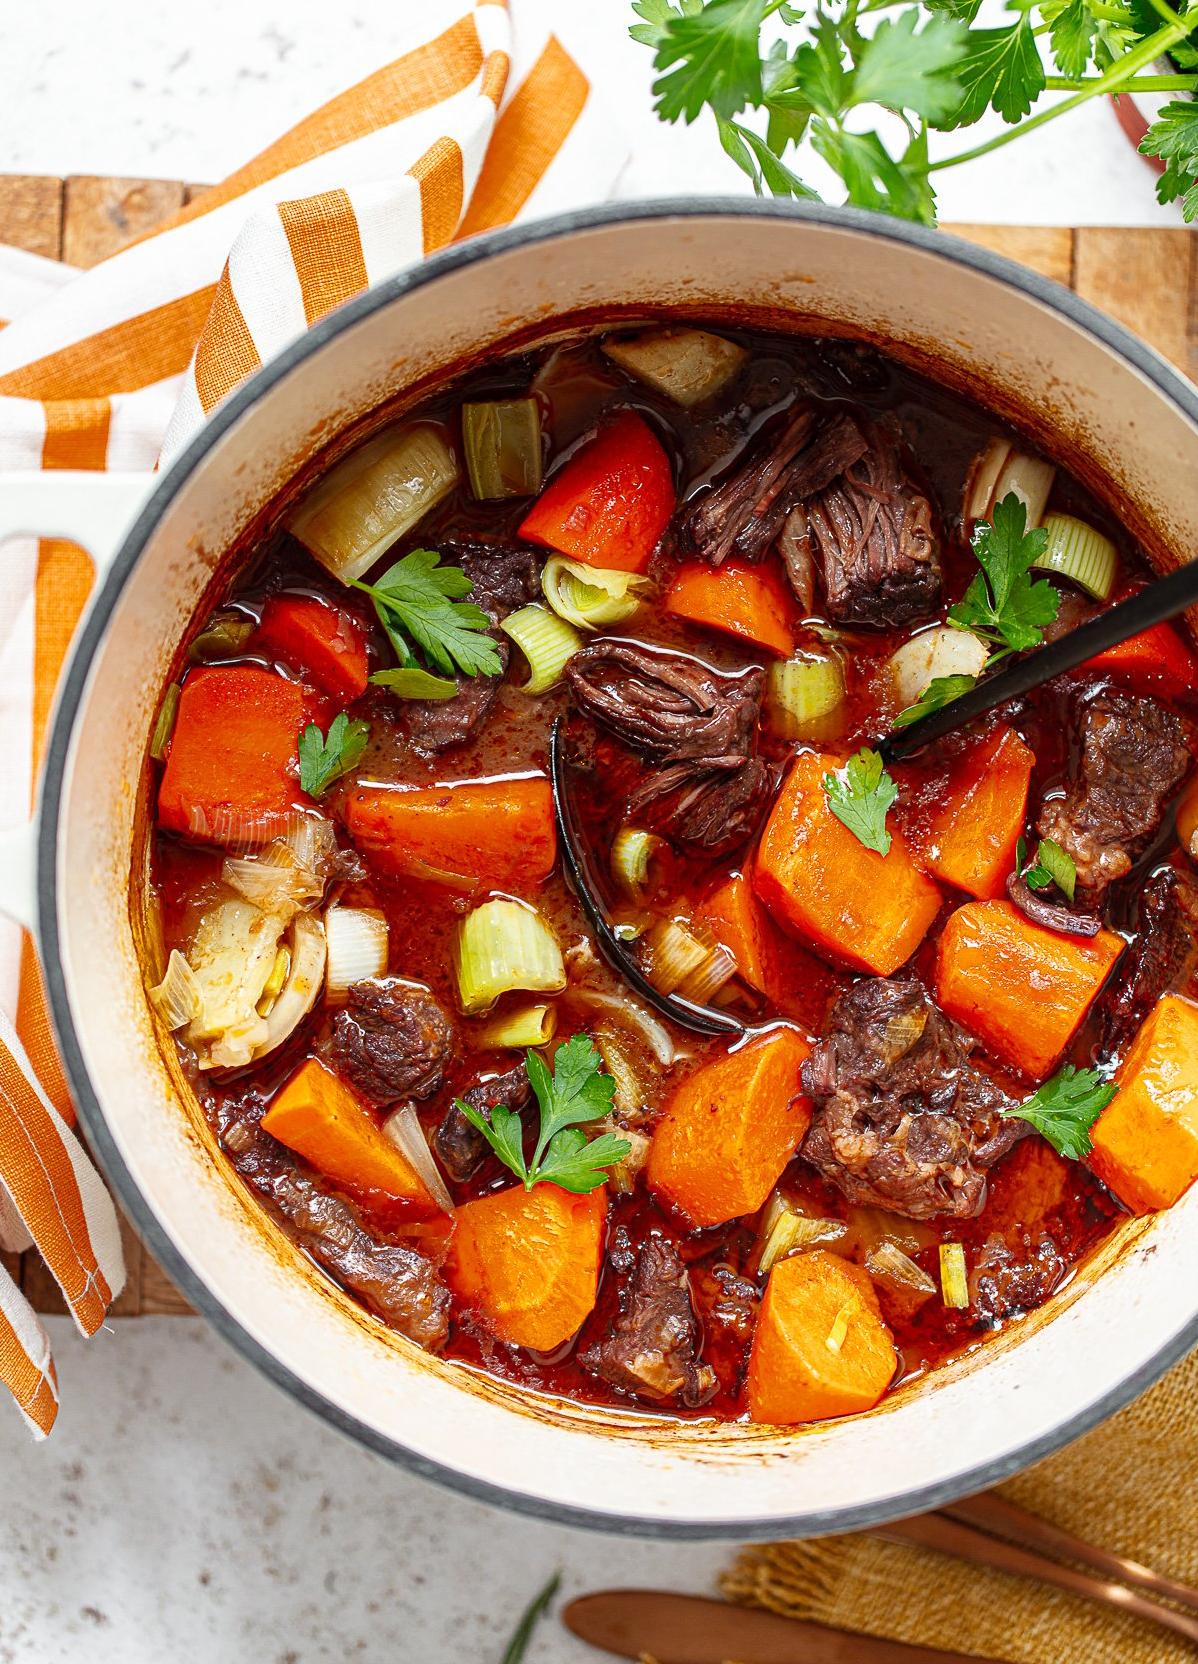  A warm bowl of beef soup with a rich red wine broth that's perfect for chilly nights.